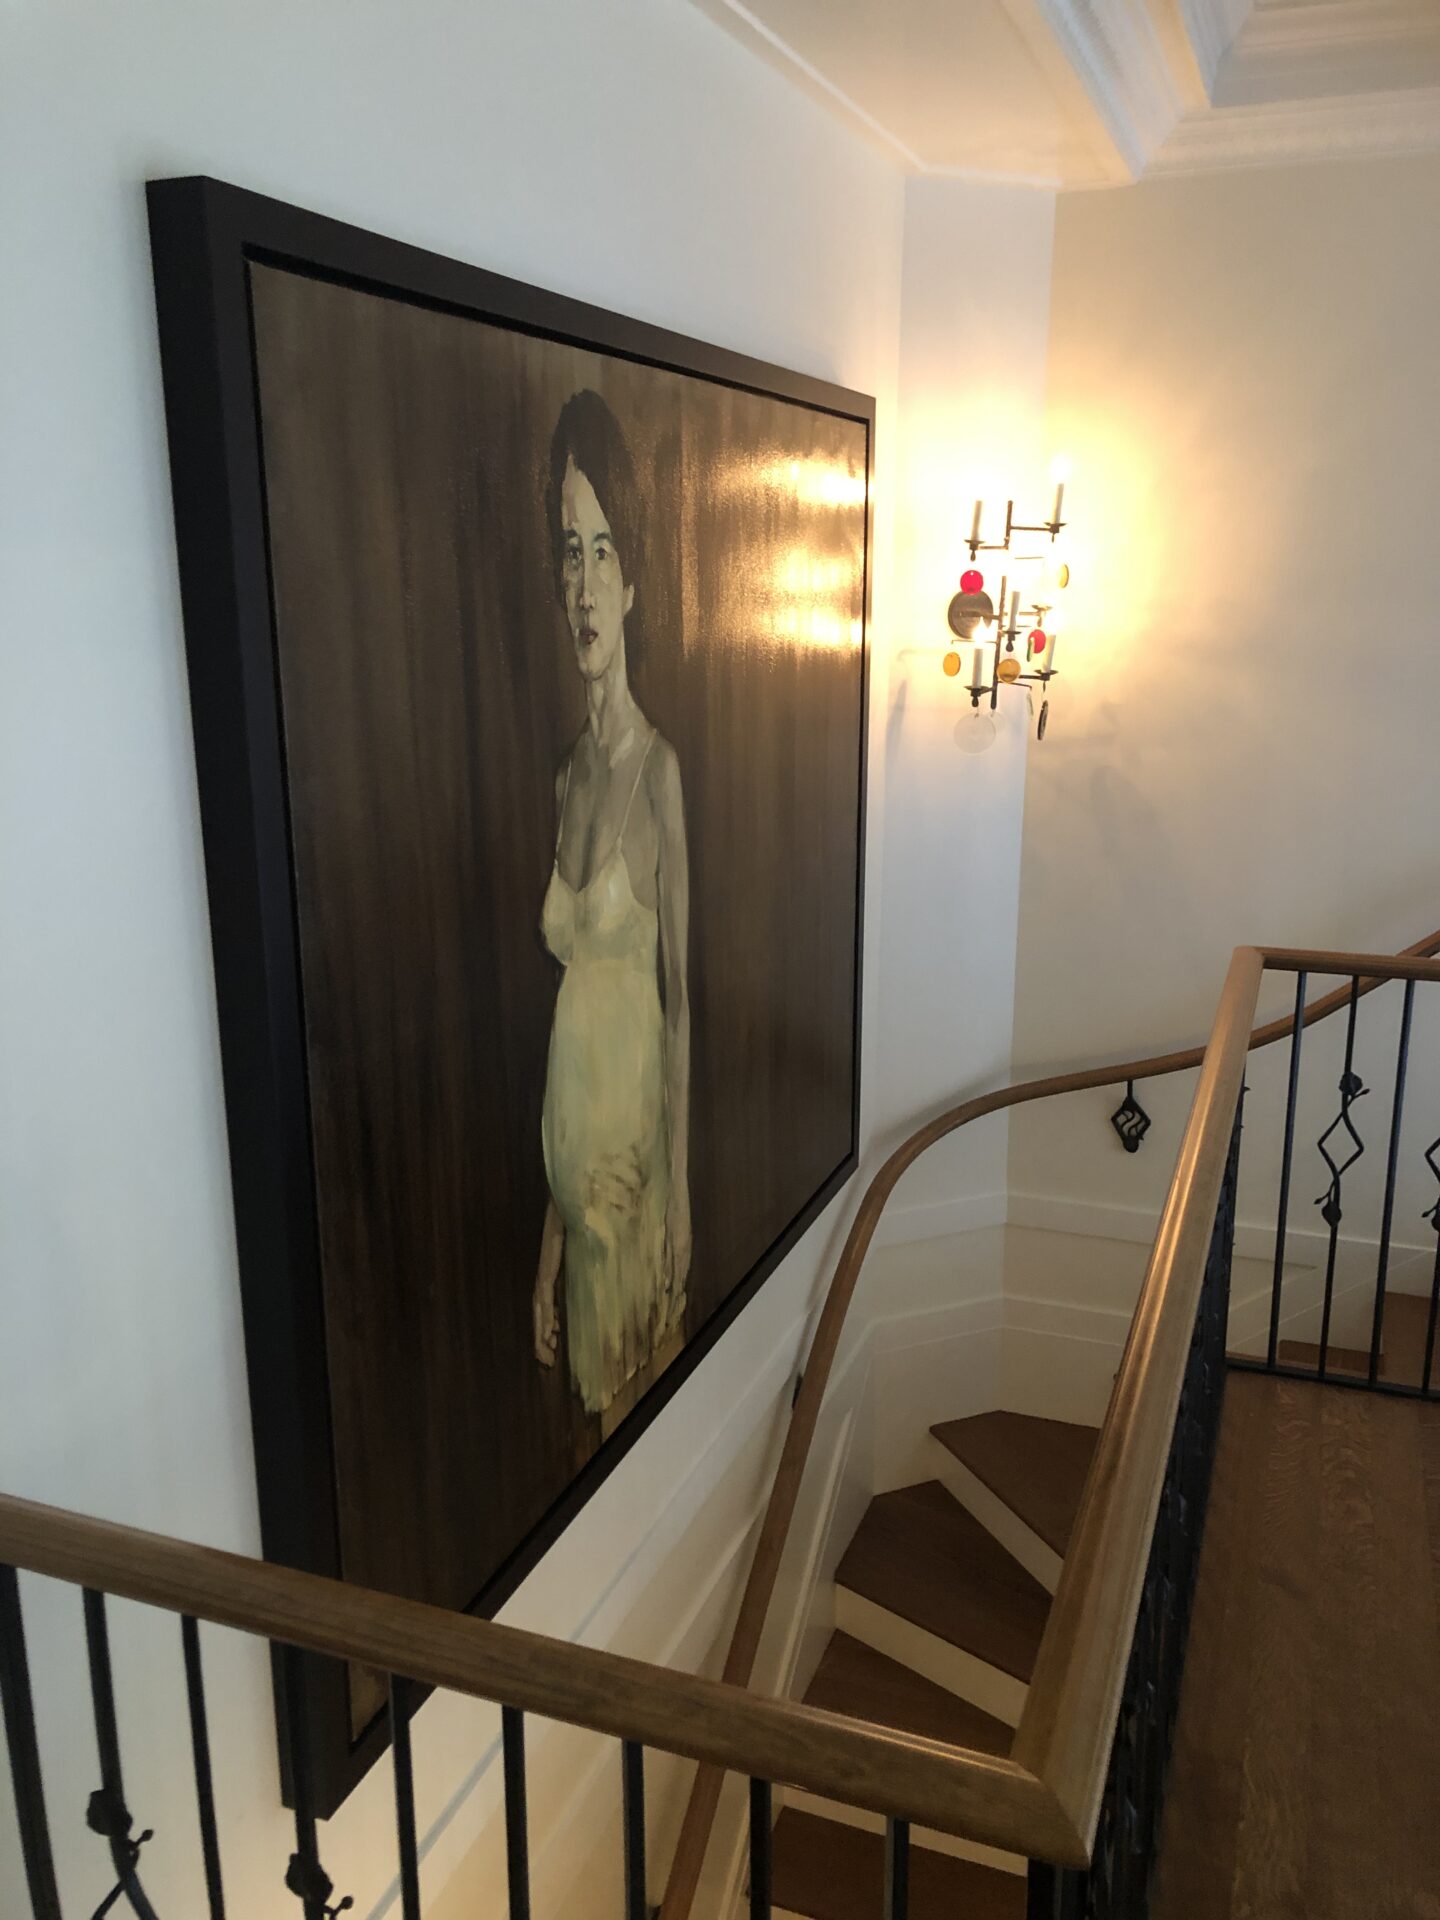 A staircase with a large painting on the wall.